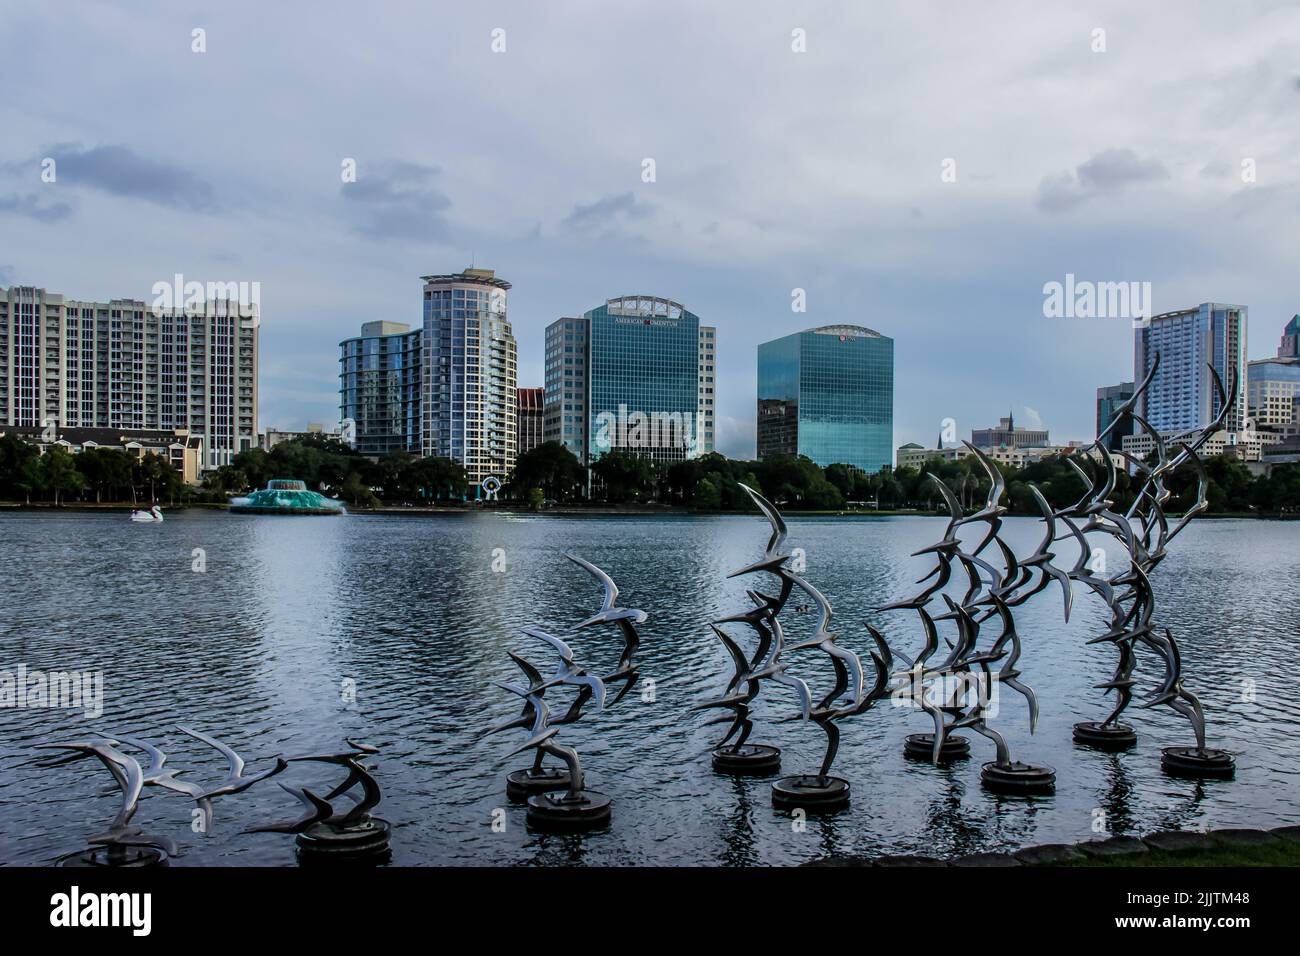 A sculpture of a flock of birds taking off in the Lake Eola in Orlando, Florida Stock Photo